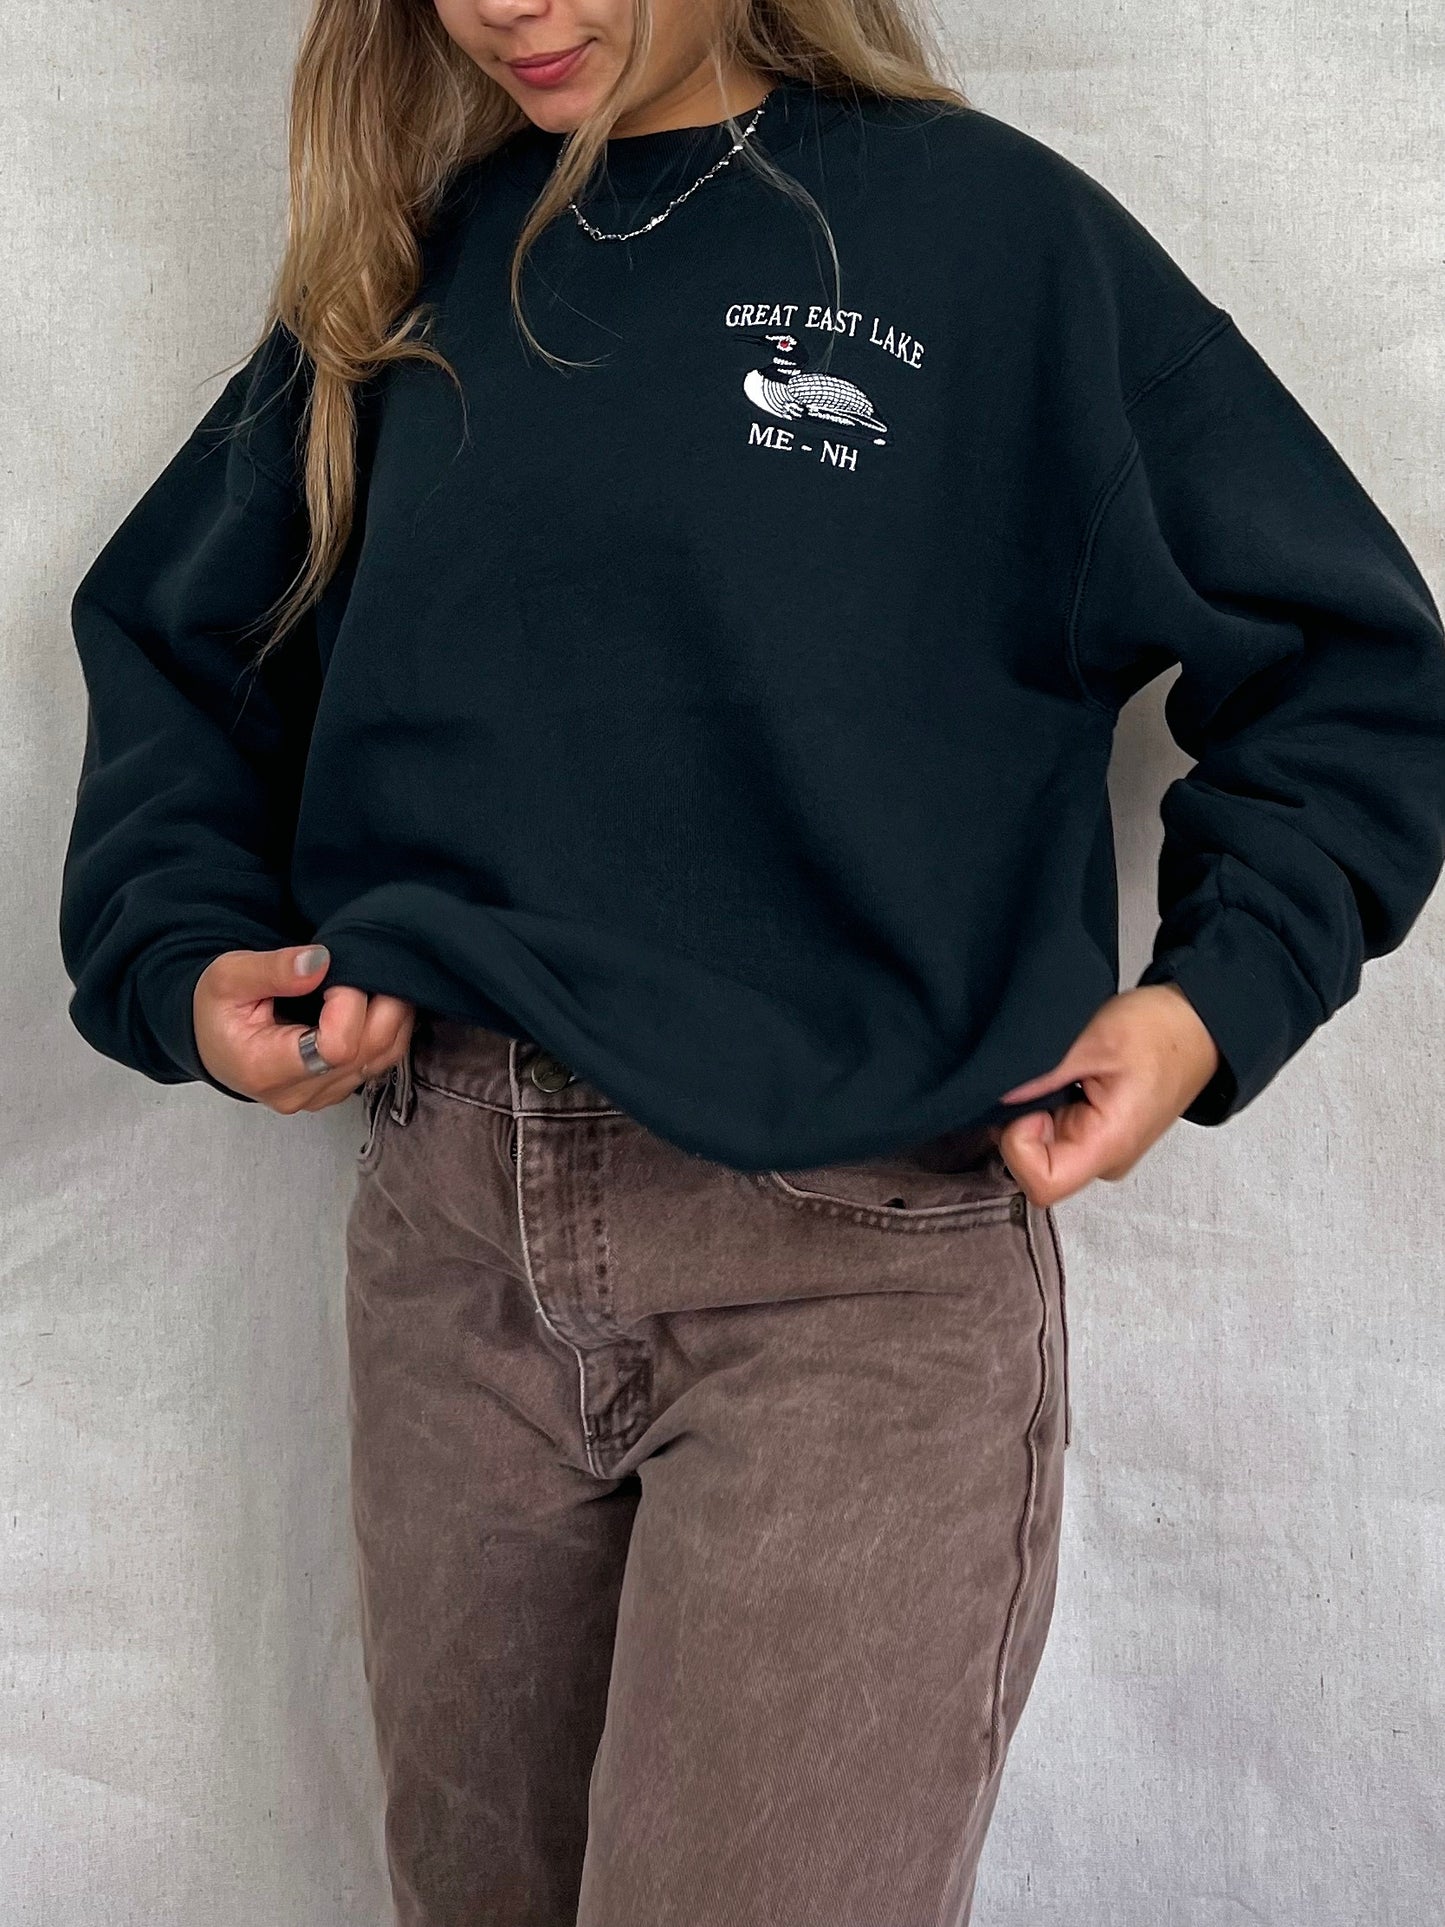 90's Great East Lake USA Made Embroidered Vintage Sweatshirt Size 14